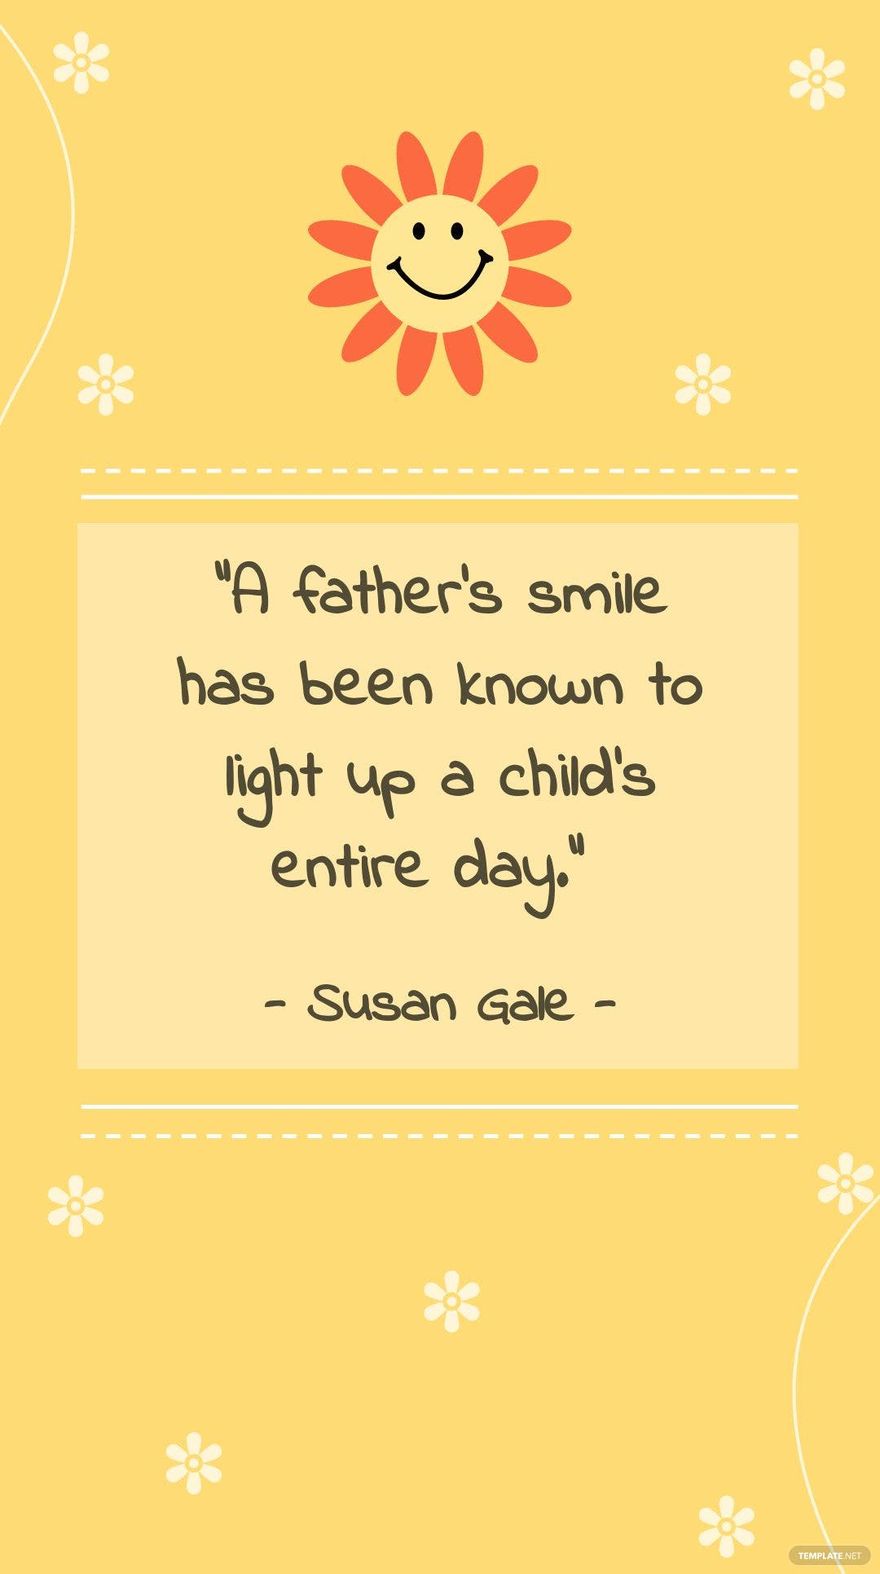 Susan Gale - “A father’s smile has been known to light up a child’s entire day.” in JPG